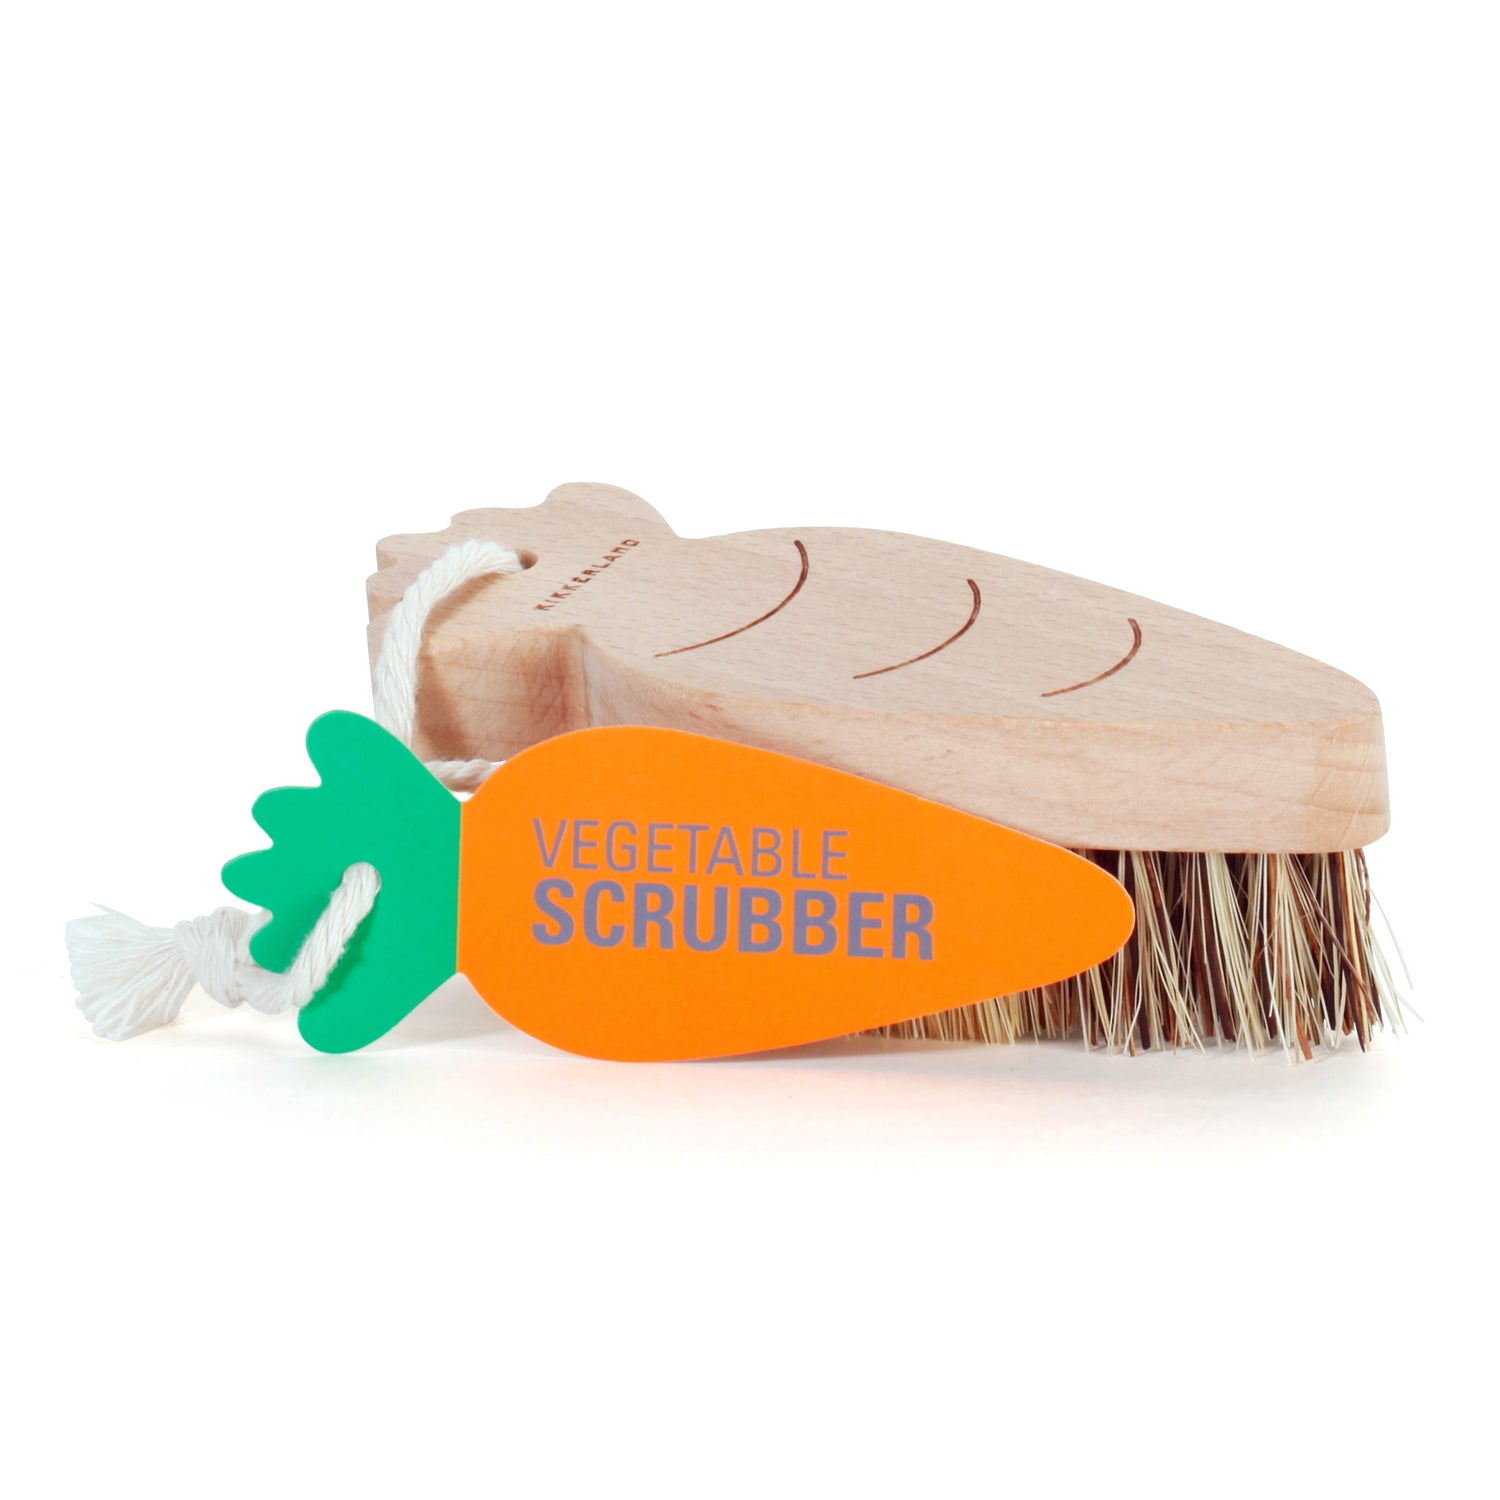 Hedgehog Dish Scrubber - Adorable and Functional Kitchen Helper! — Port  Gamble General Store & Cafe